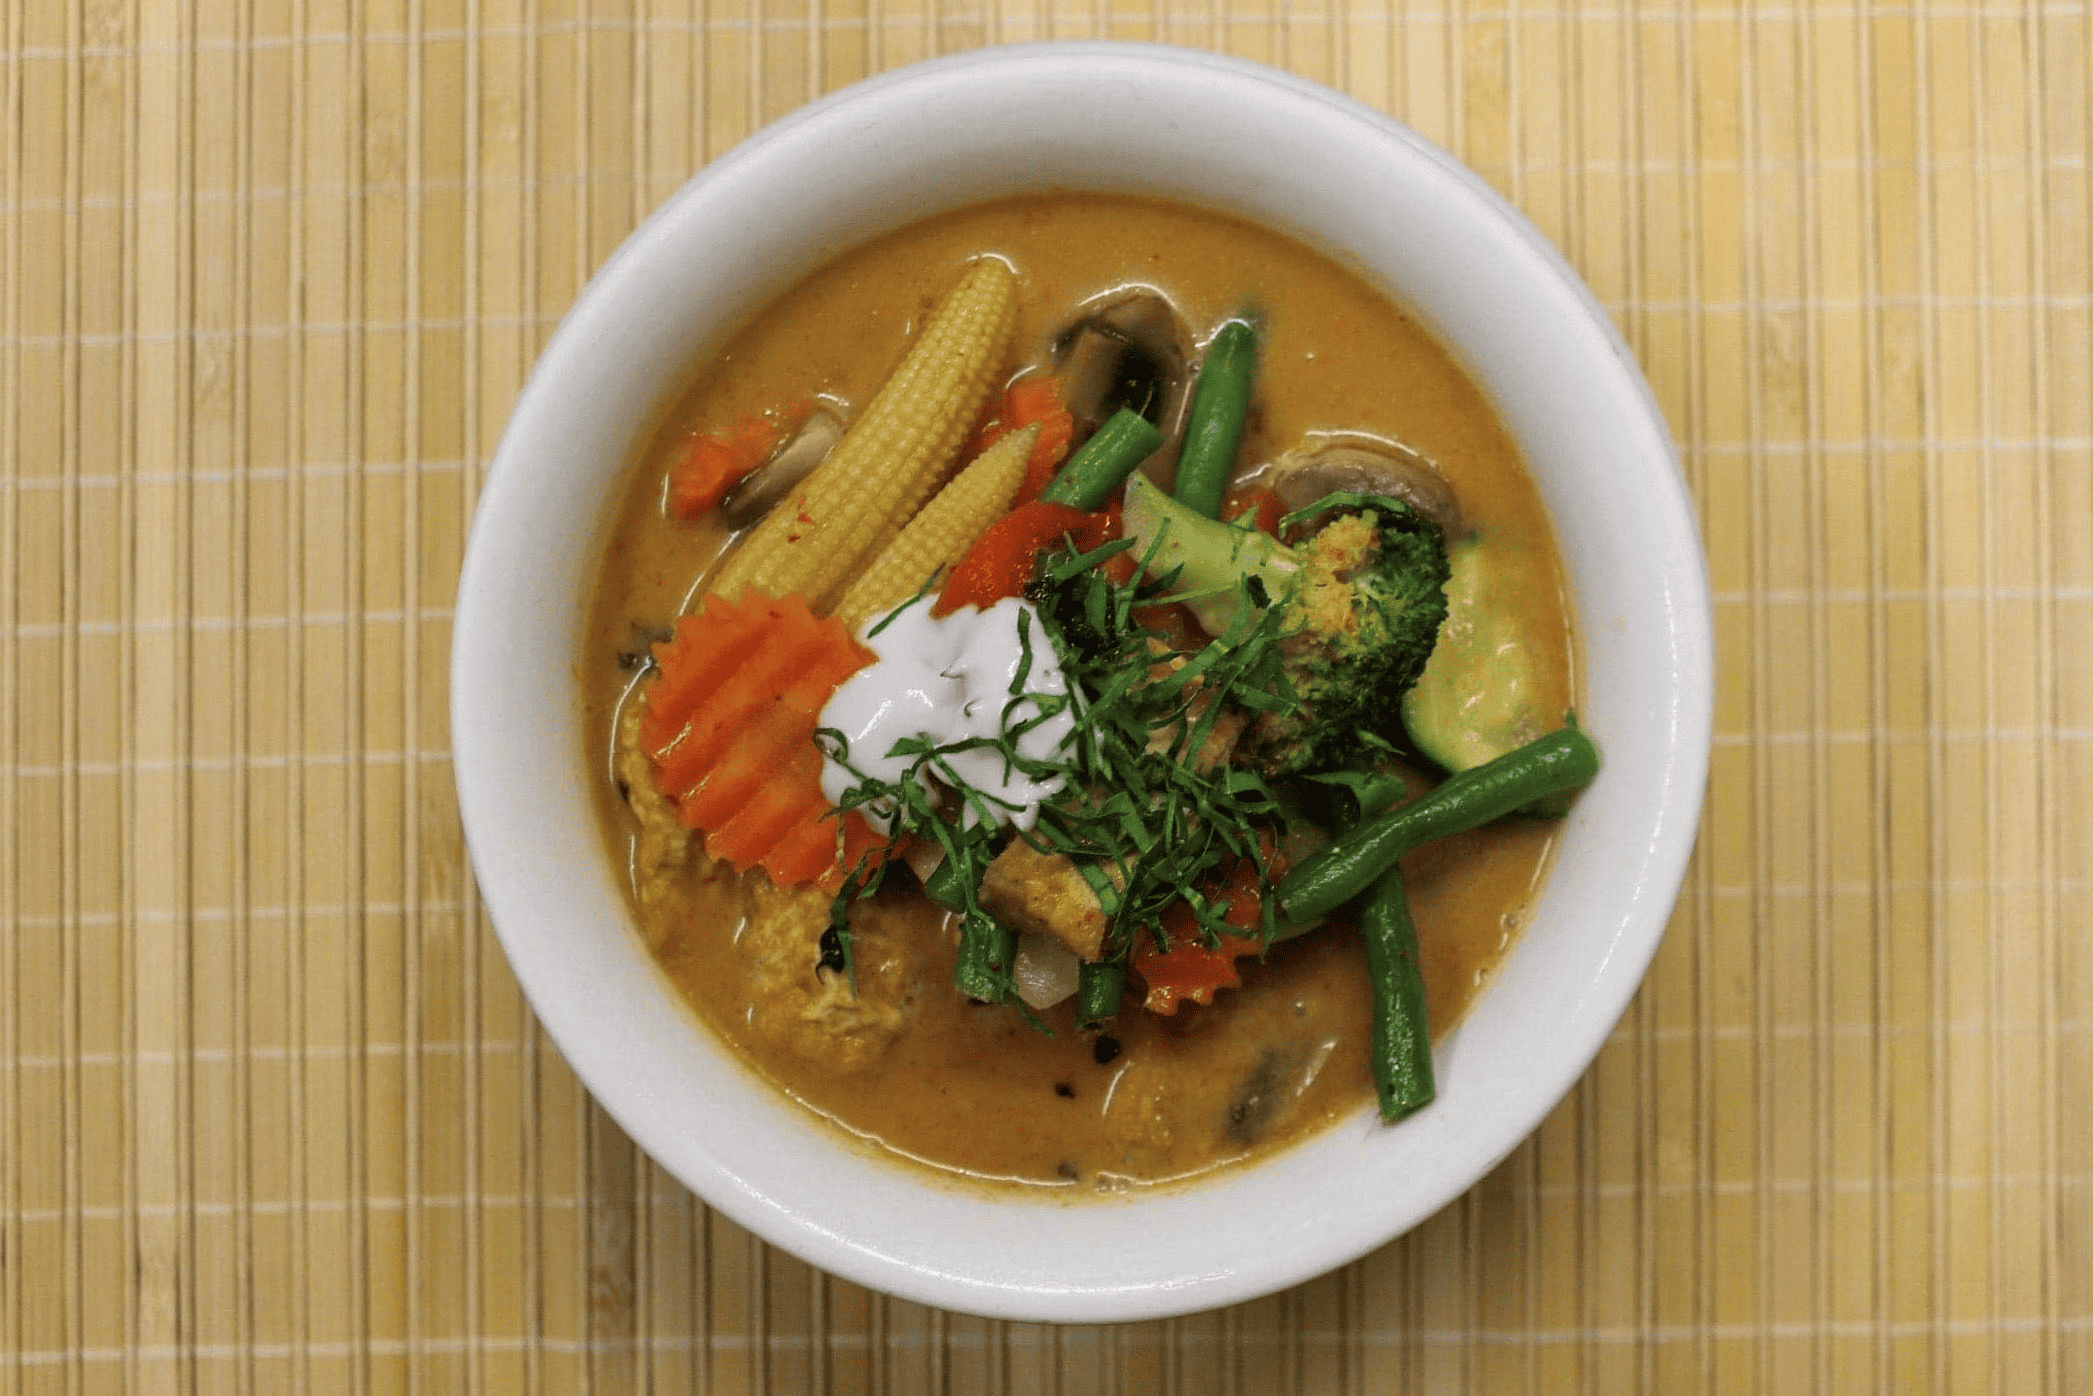 A bowl of rich and creamy Panang curry topped with crushed peanuts.